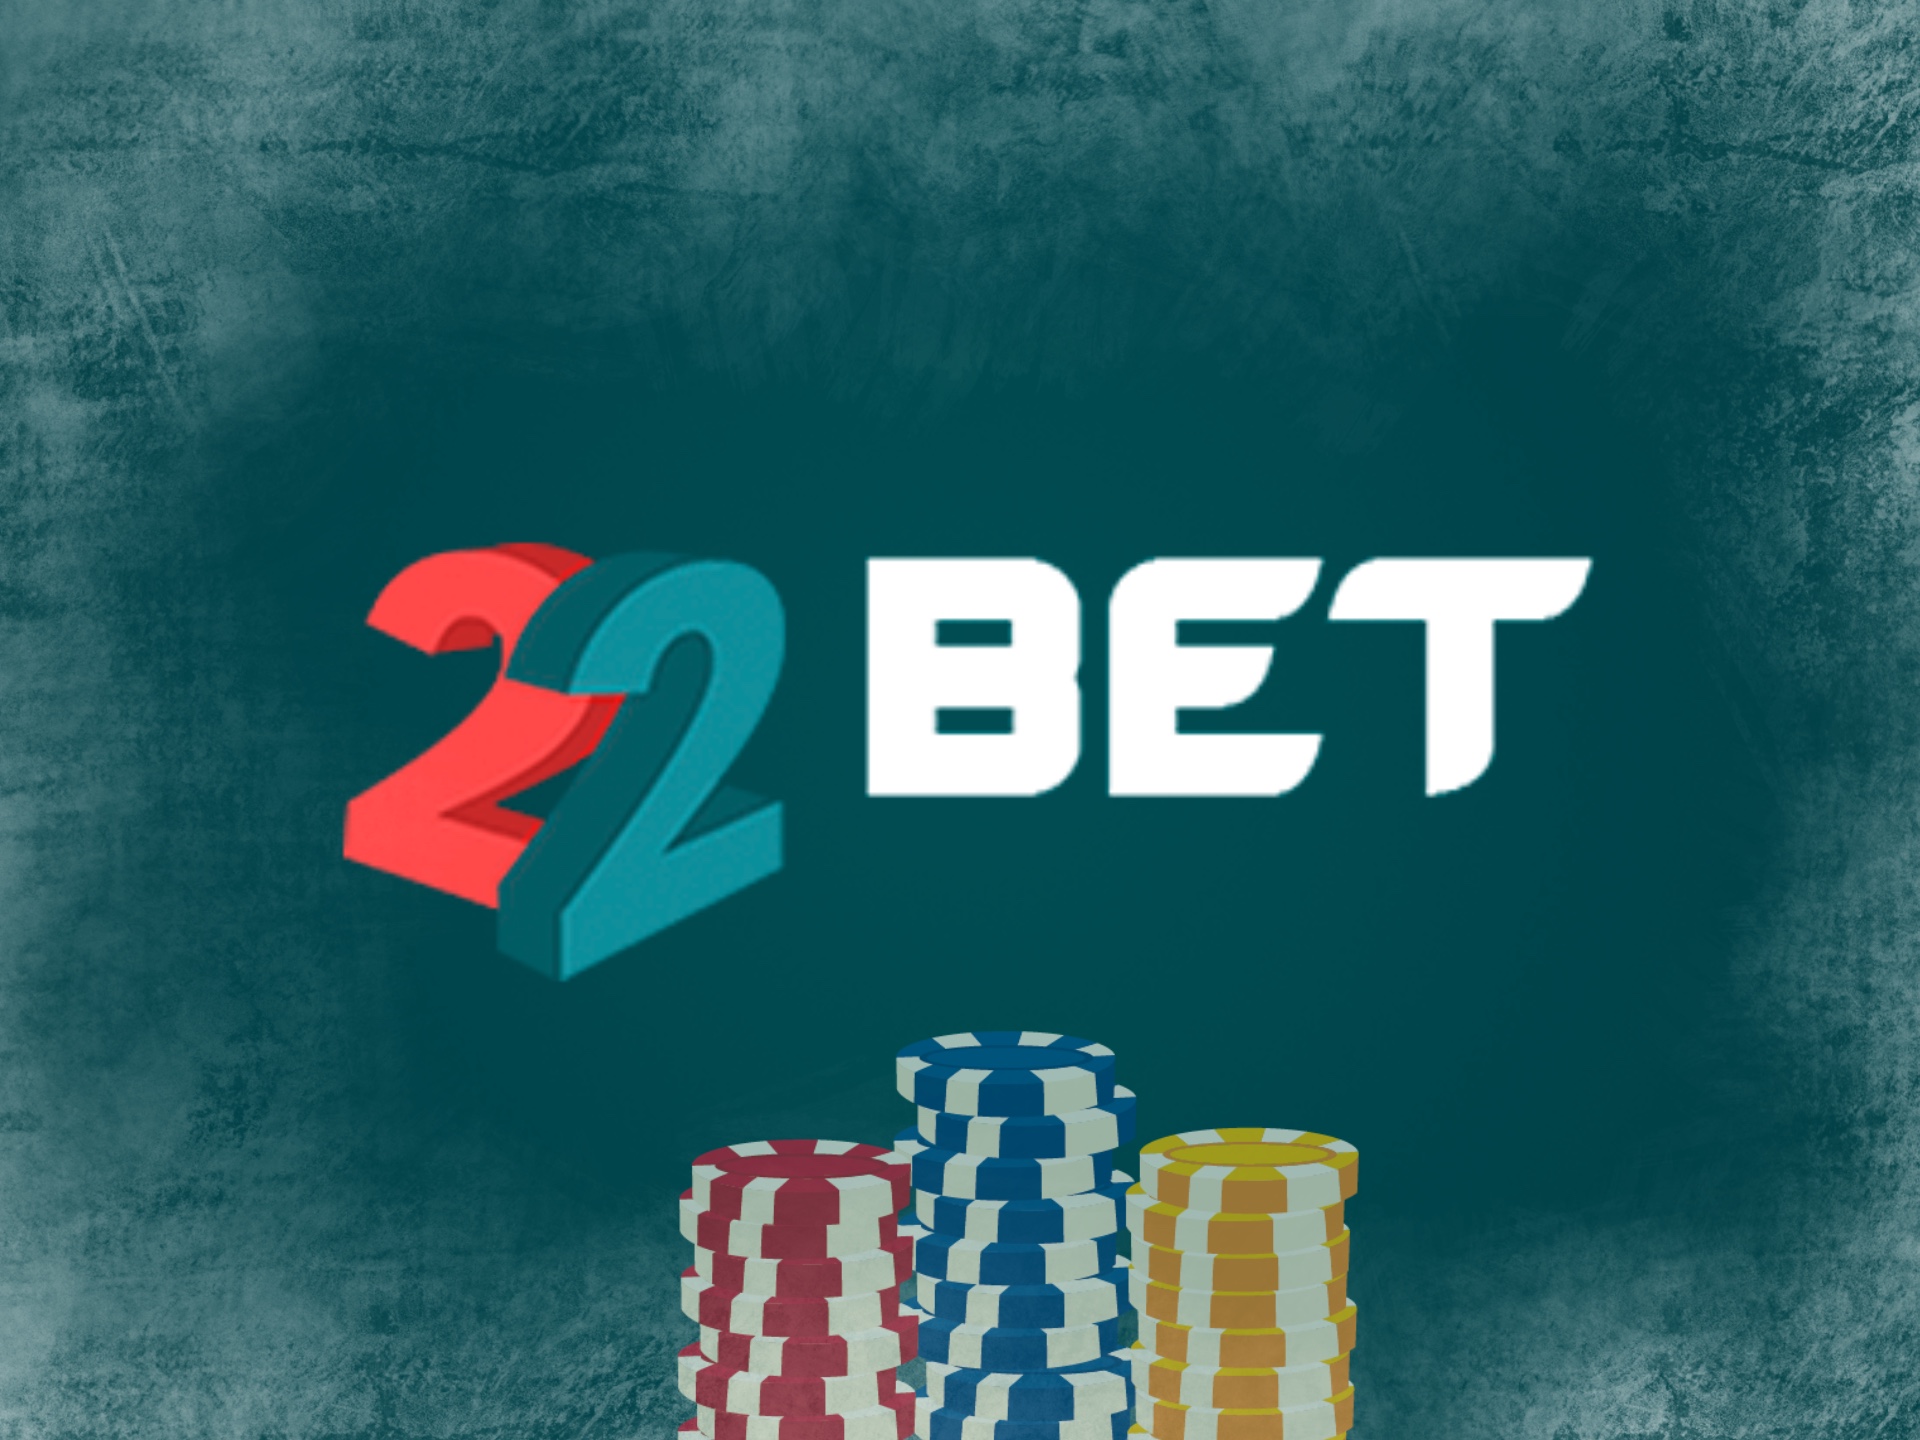 22bet is a very convenient casino for playing casino games.